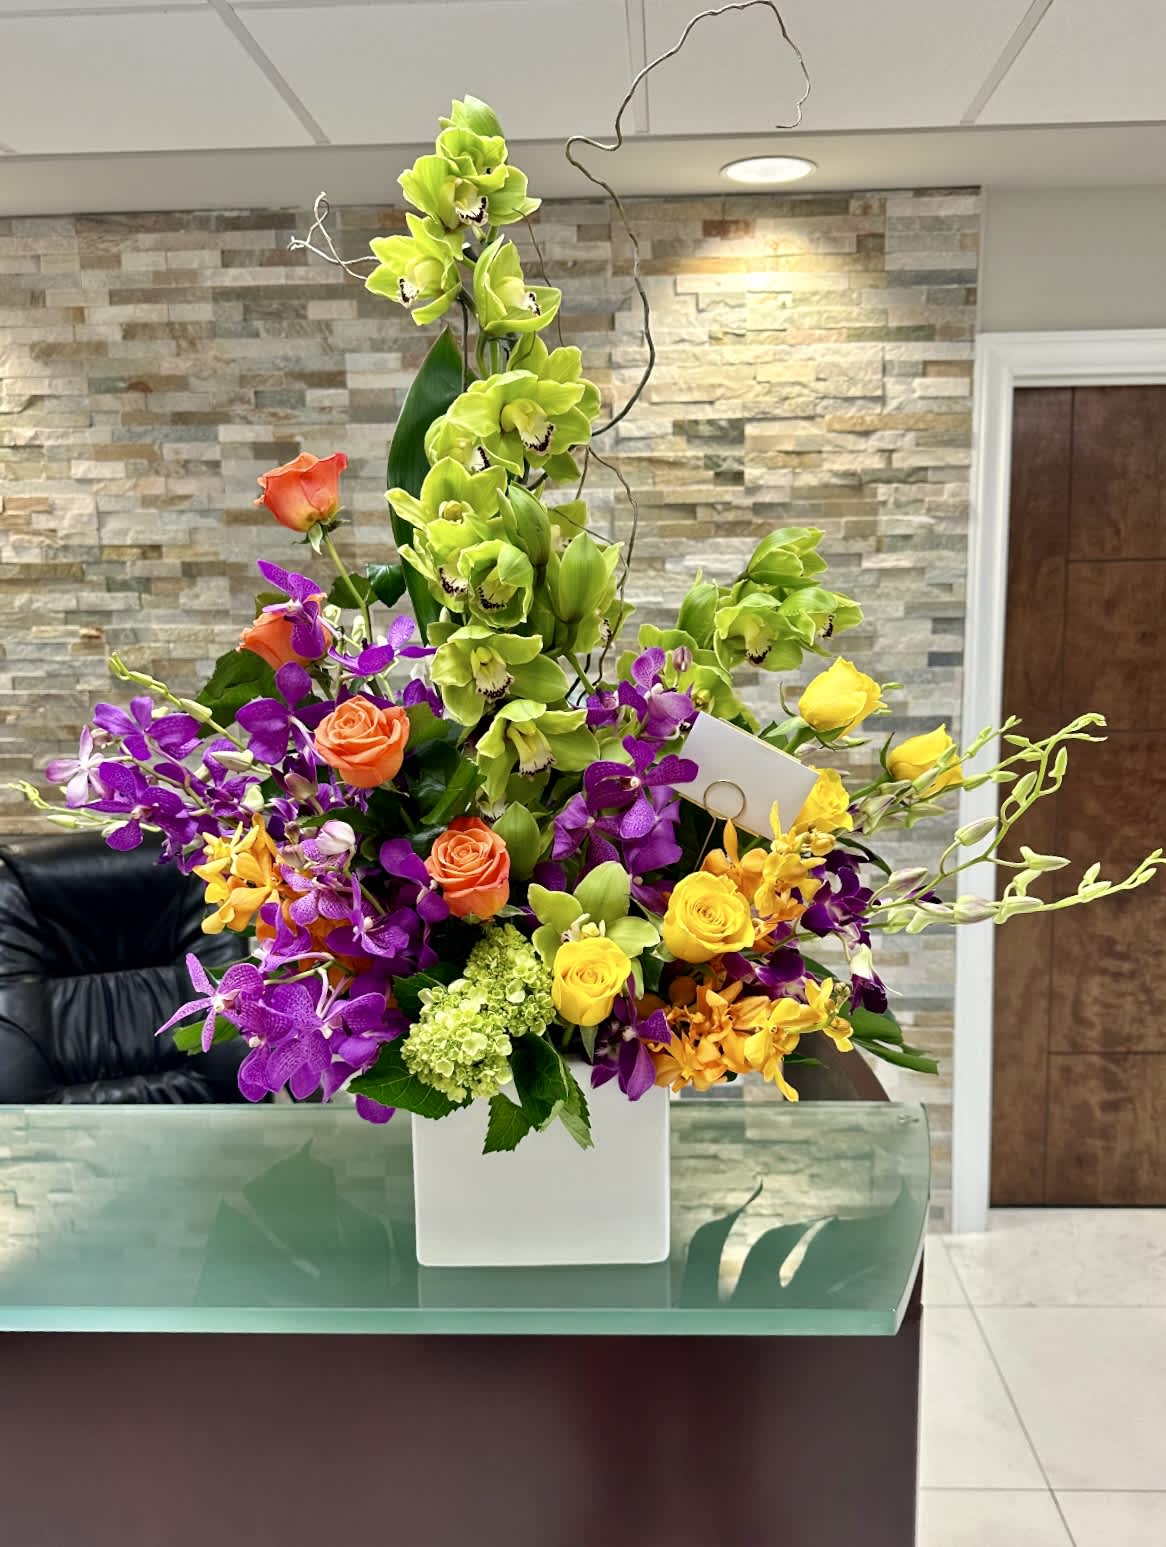 Spontaneous  - Arrangement of mixed tropical flowers in a square ceramic vase